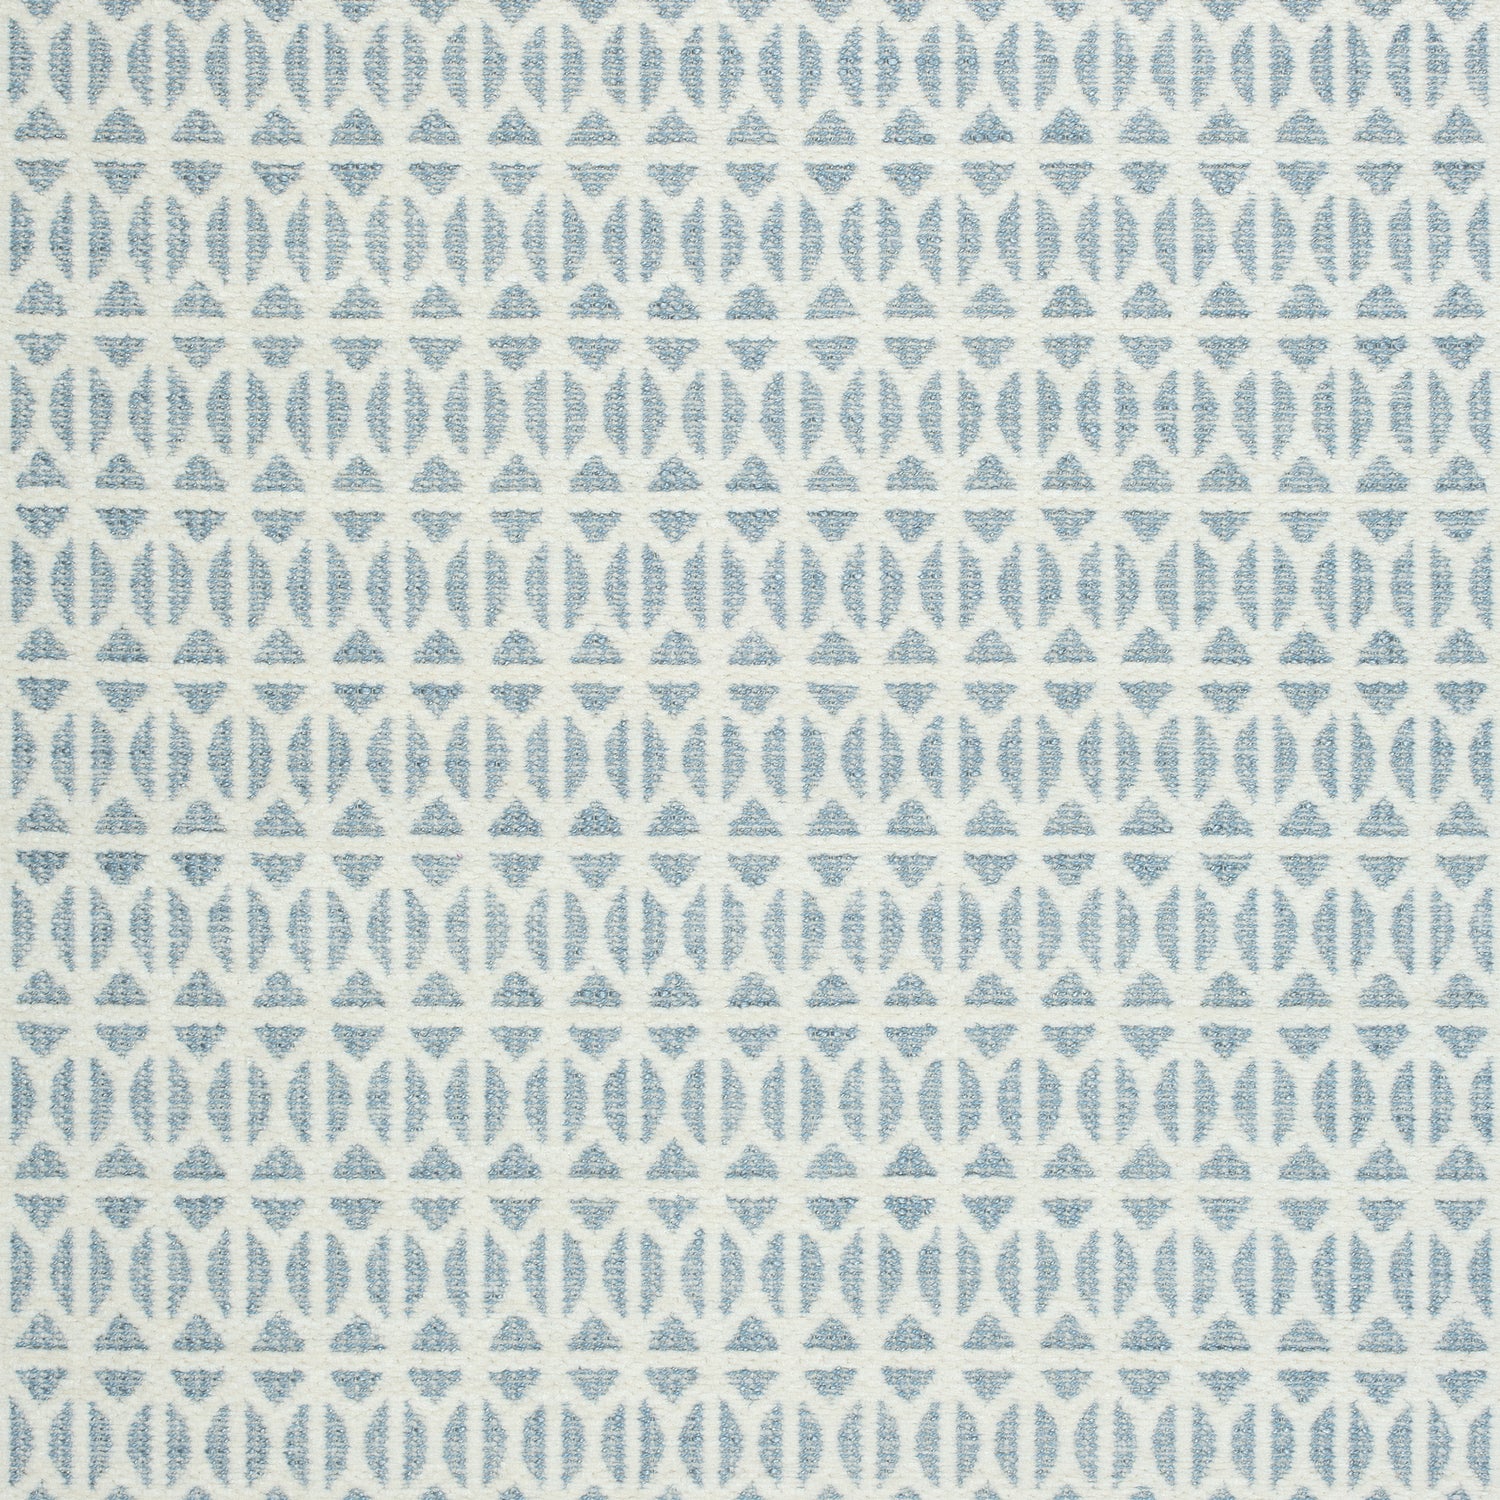 Quinlan fabric in sky color - pattern number W789108 - by Thibaut in the Reverie collection